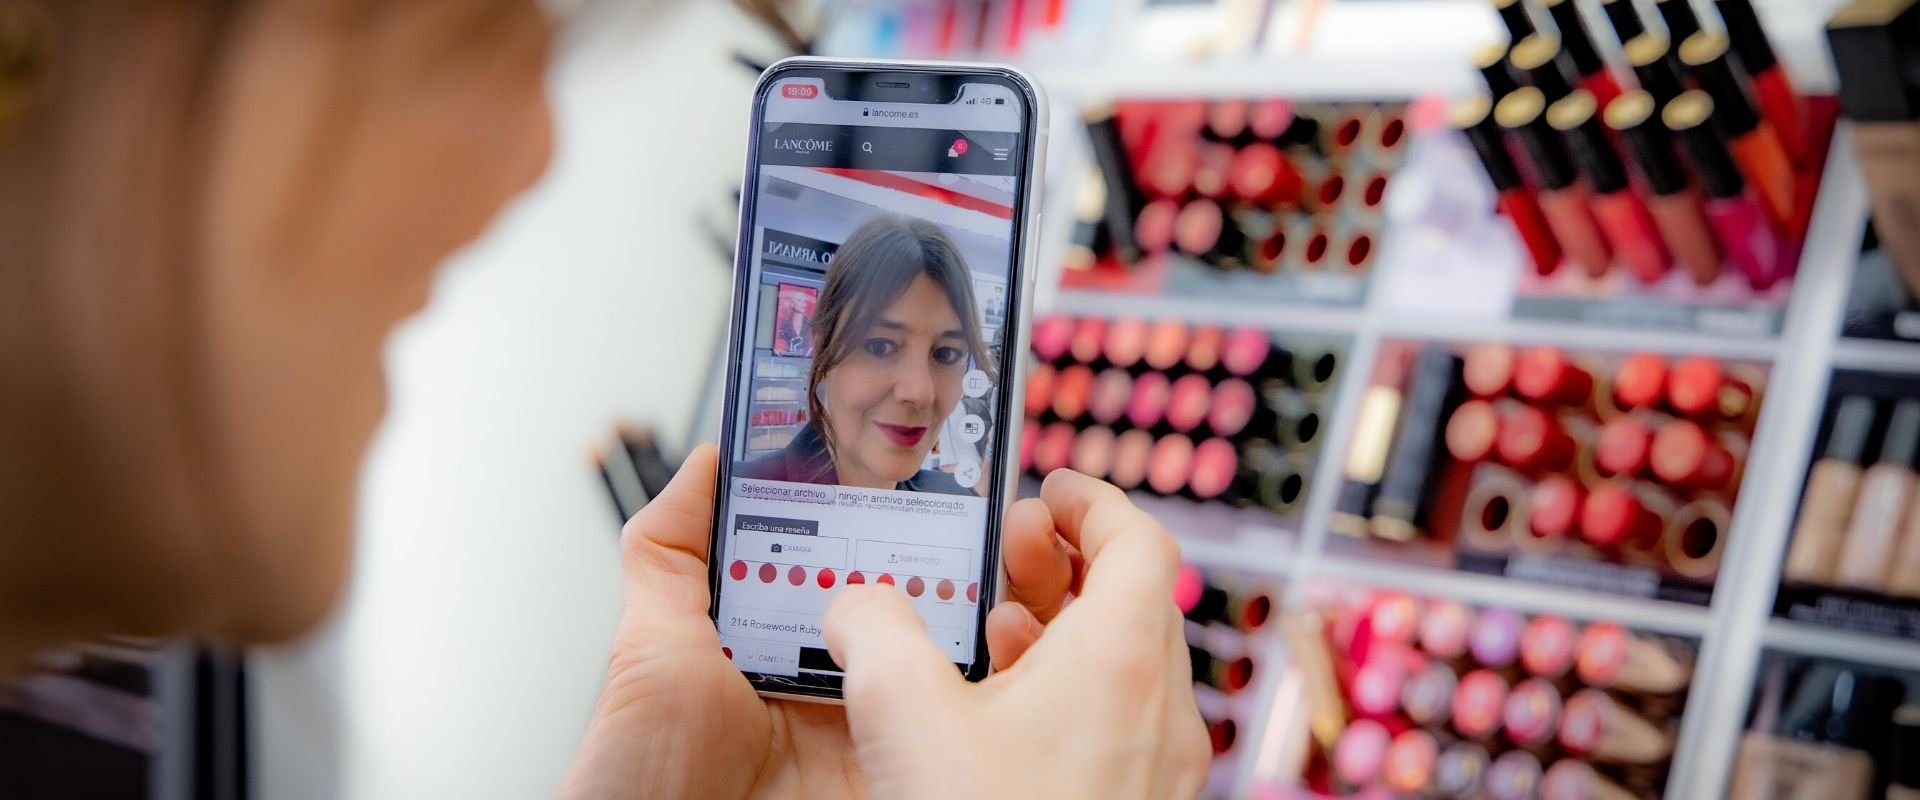 L'Oréal's Modiface Brings AI-powered Virtual Makeup Try-on To Amazon